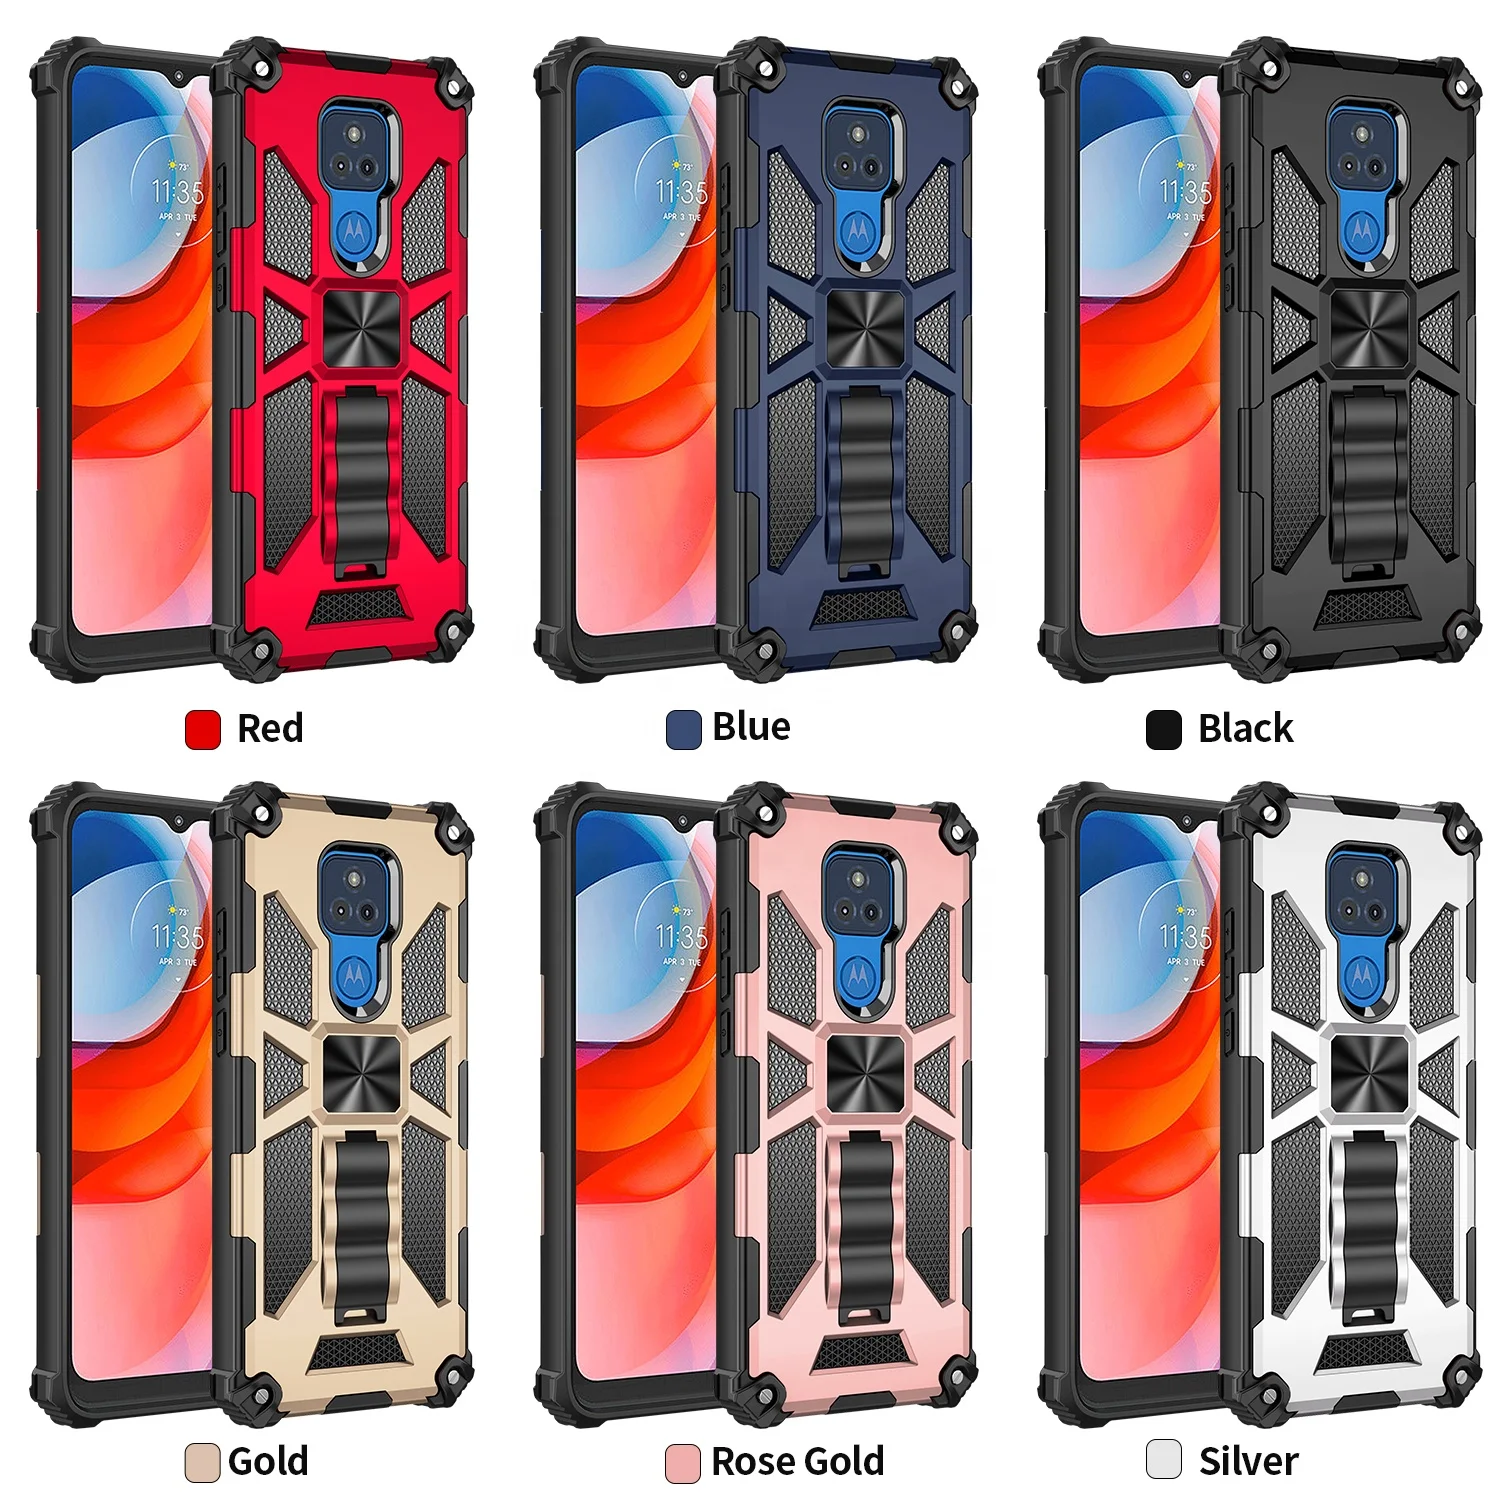 

Heavy Duty 2 in 1 Hybrid Phone Case Kickstand TPU PC Protective Phone Cover Case For Motorola G Play 2021, Multi-color, can be customized